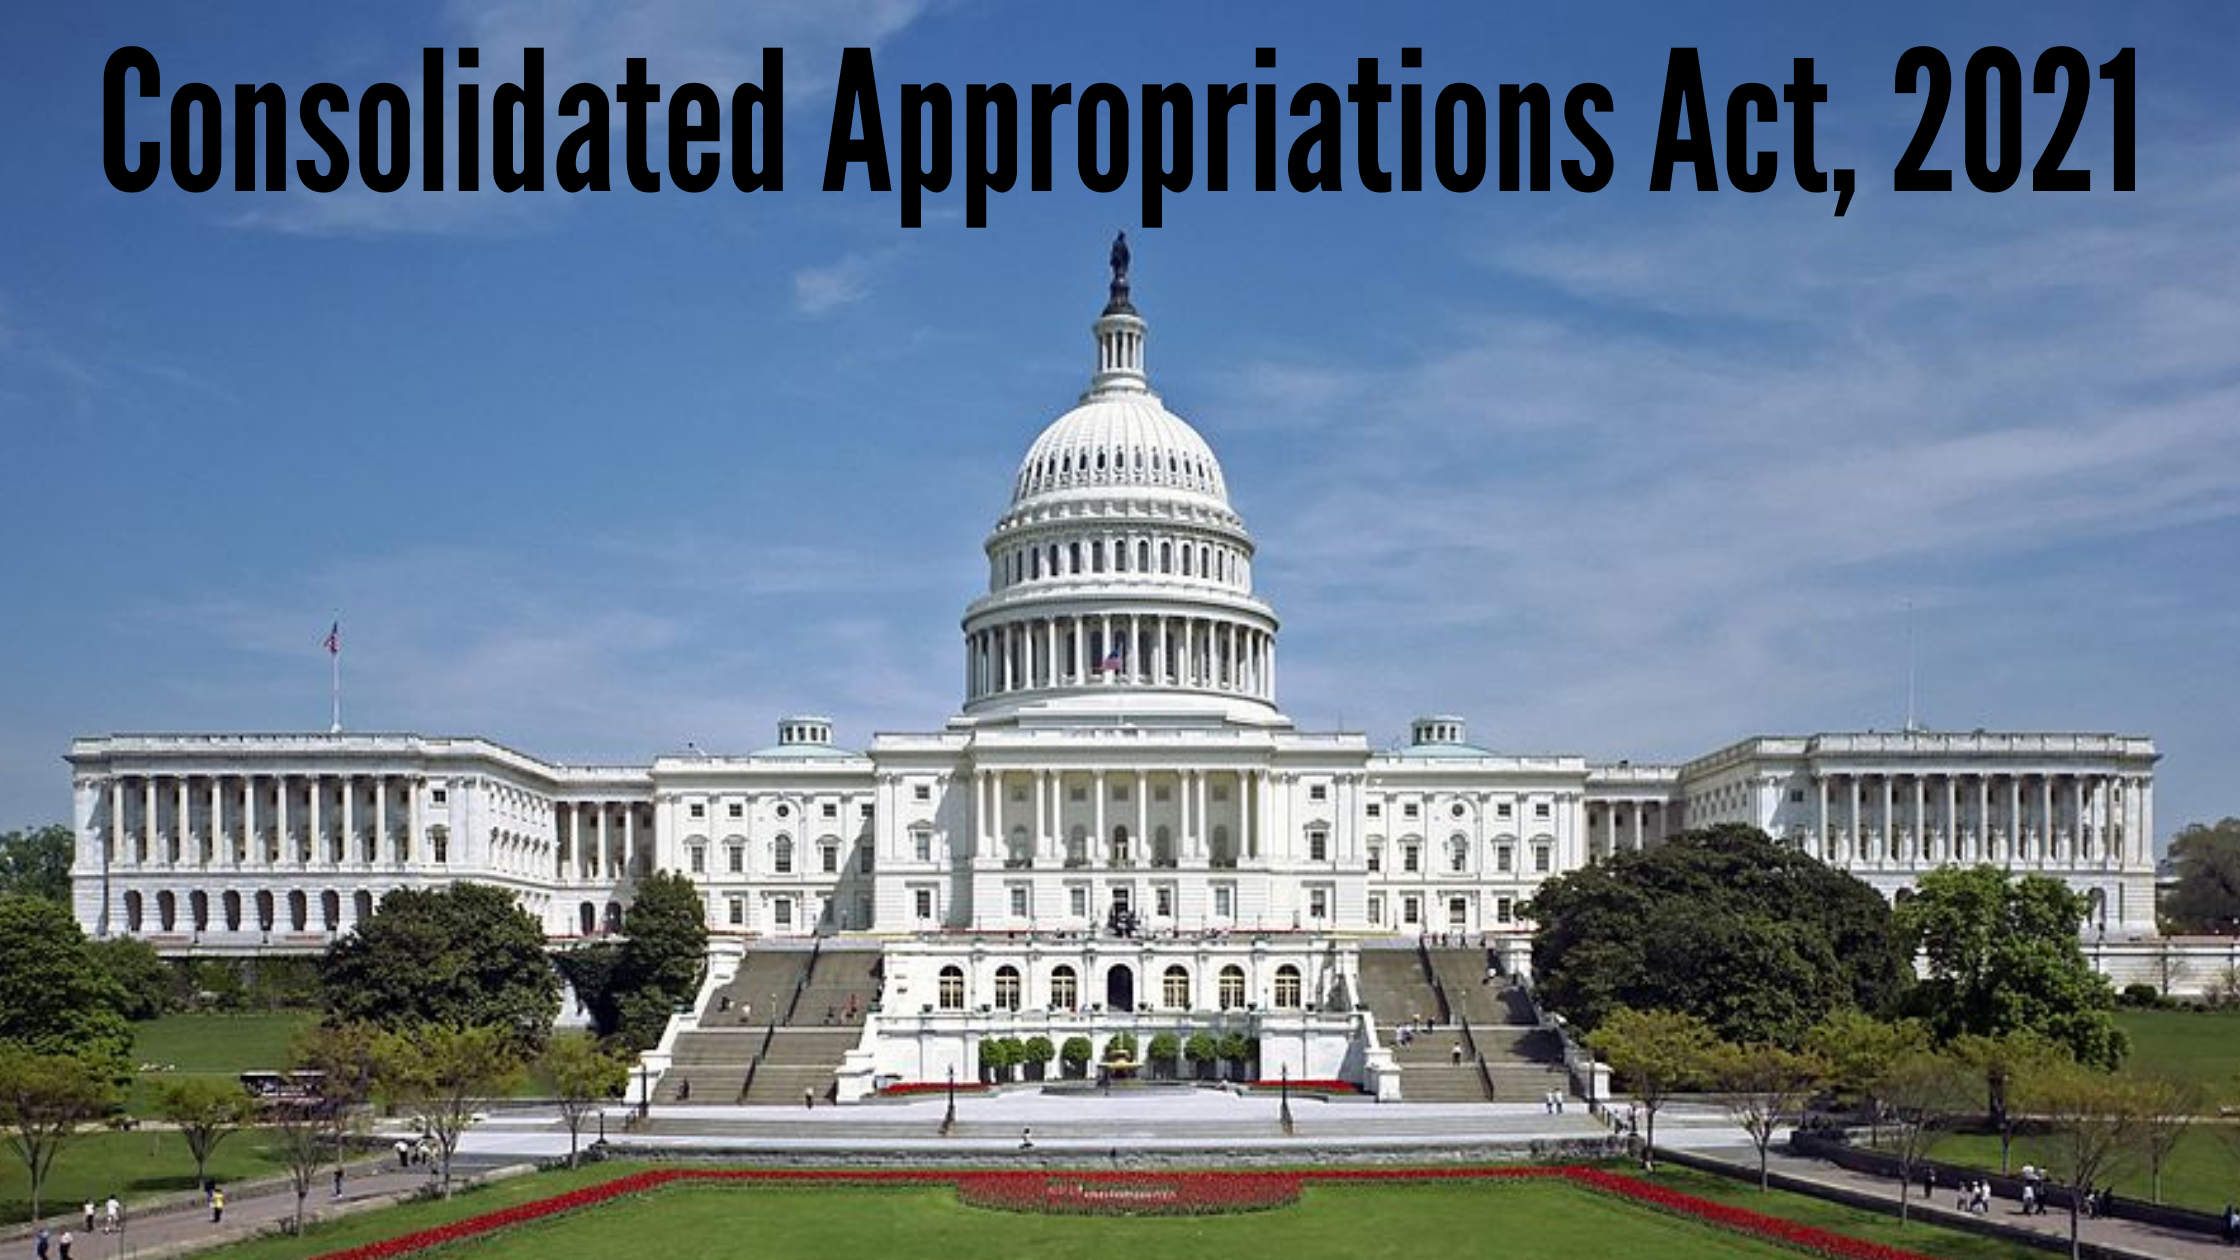 Consolidated Appropriations Act, 2021